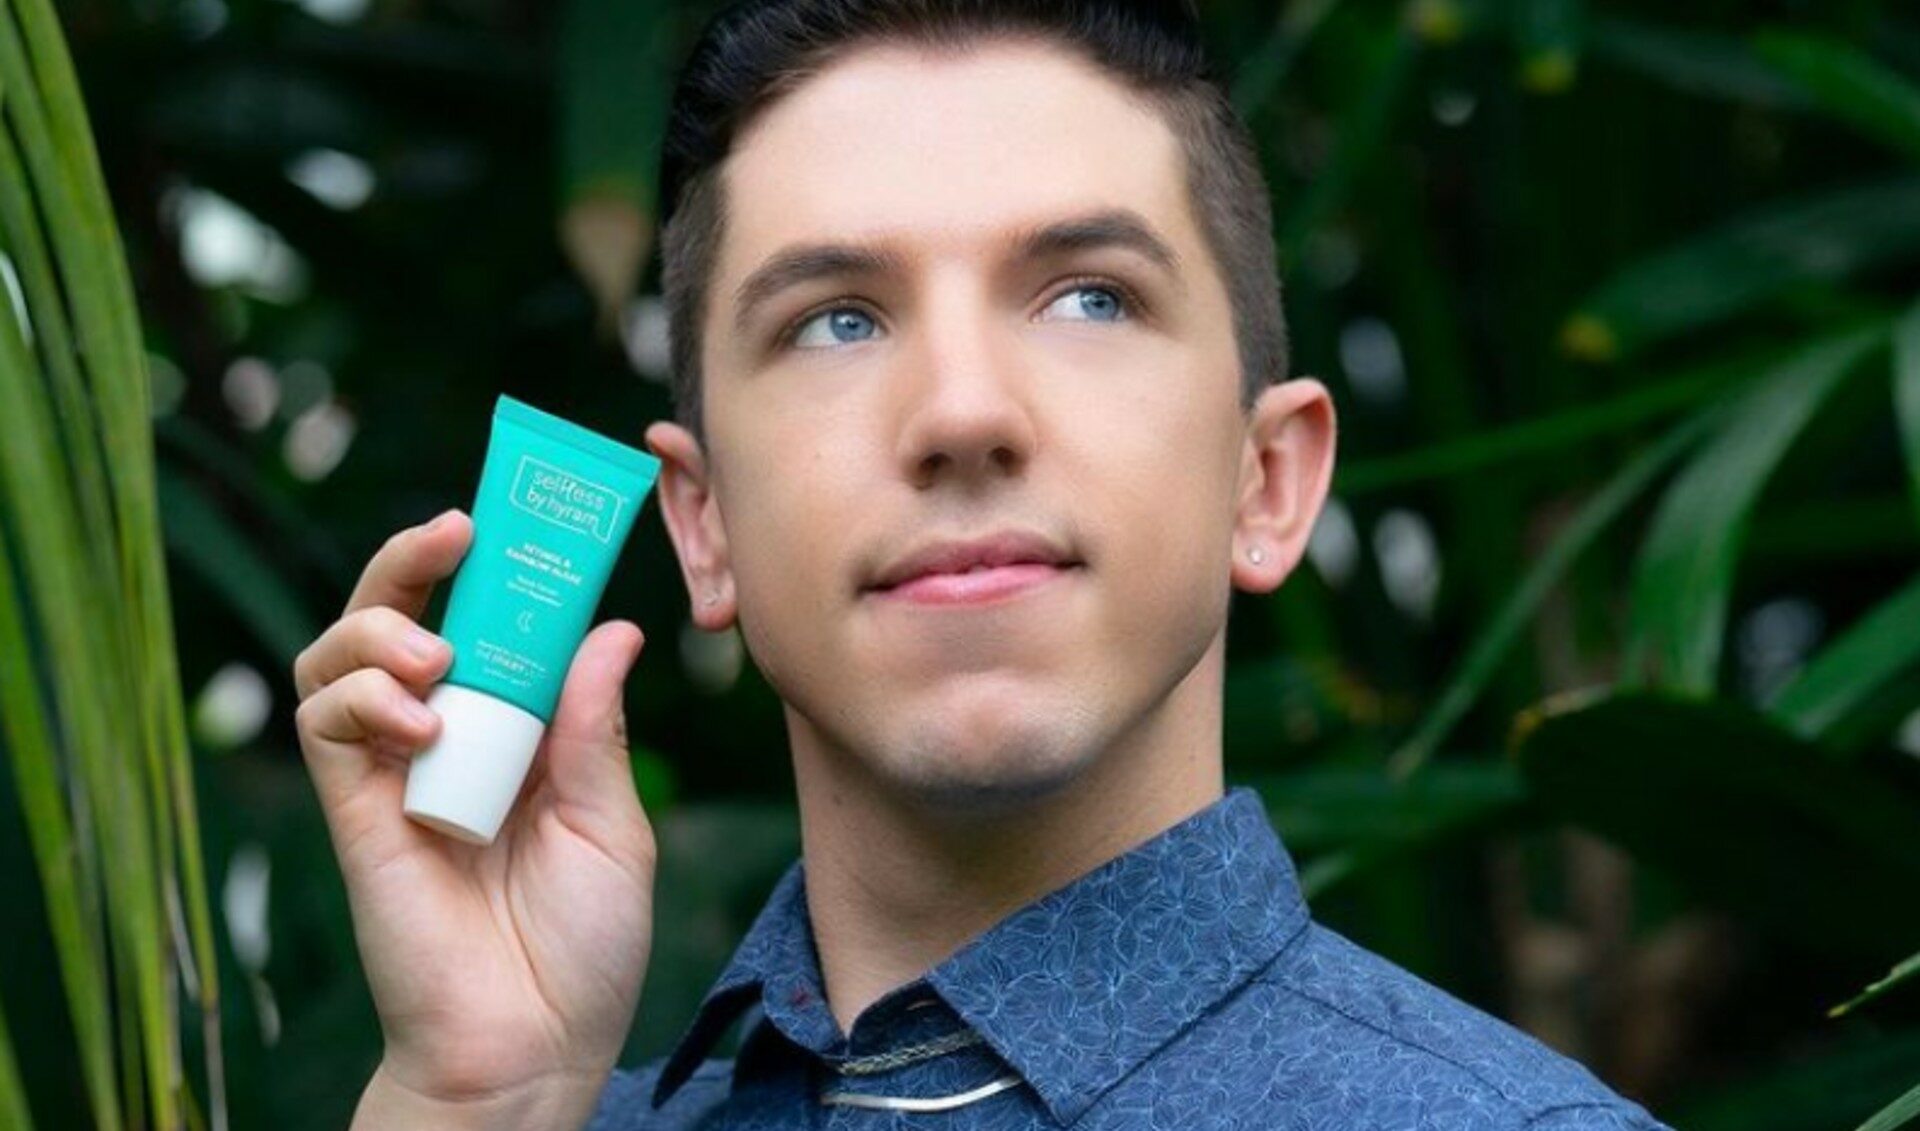 Skincare Vlogger Hyram Yarbro Is Launching His Own ‘Selfless’ Brand At Sephora Stores Globally